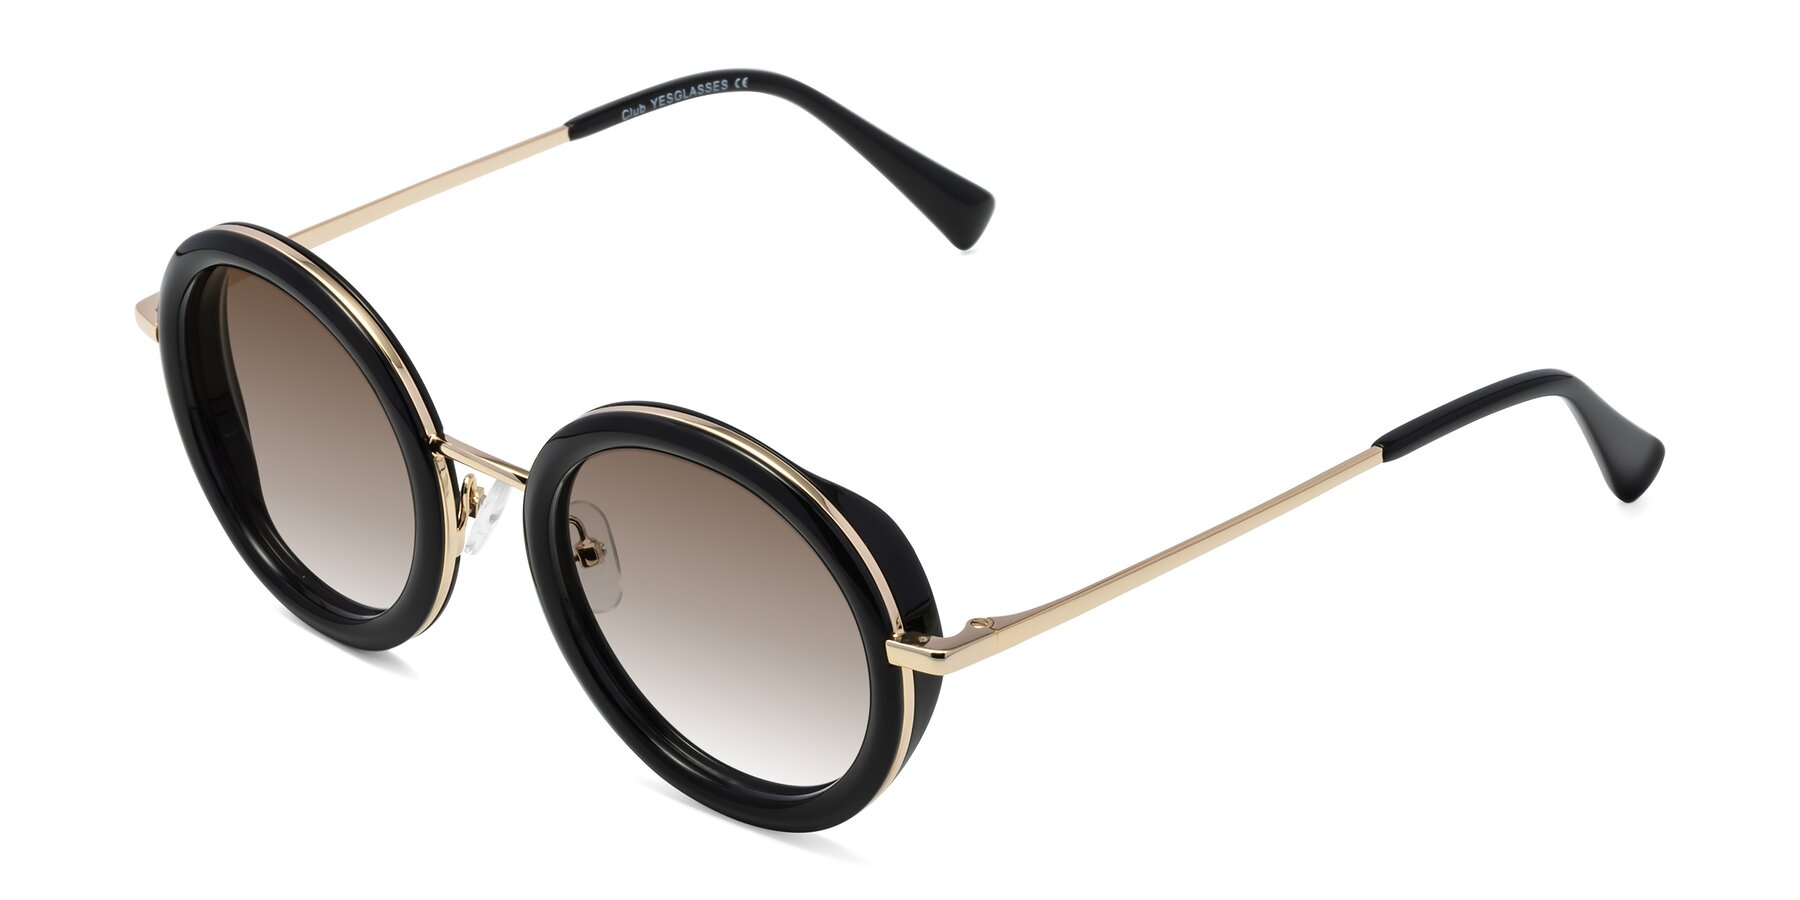 Angle of Club in Black-Gold with Brown Gradient Lenses